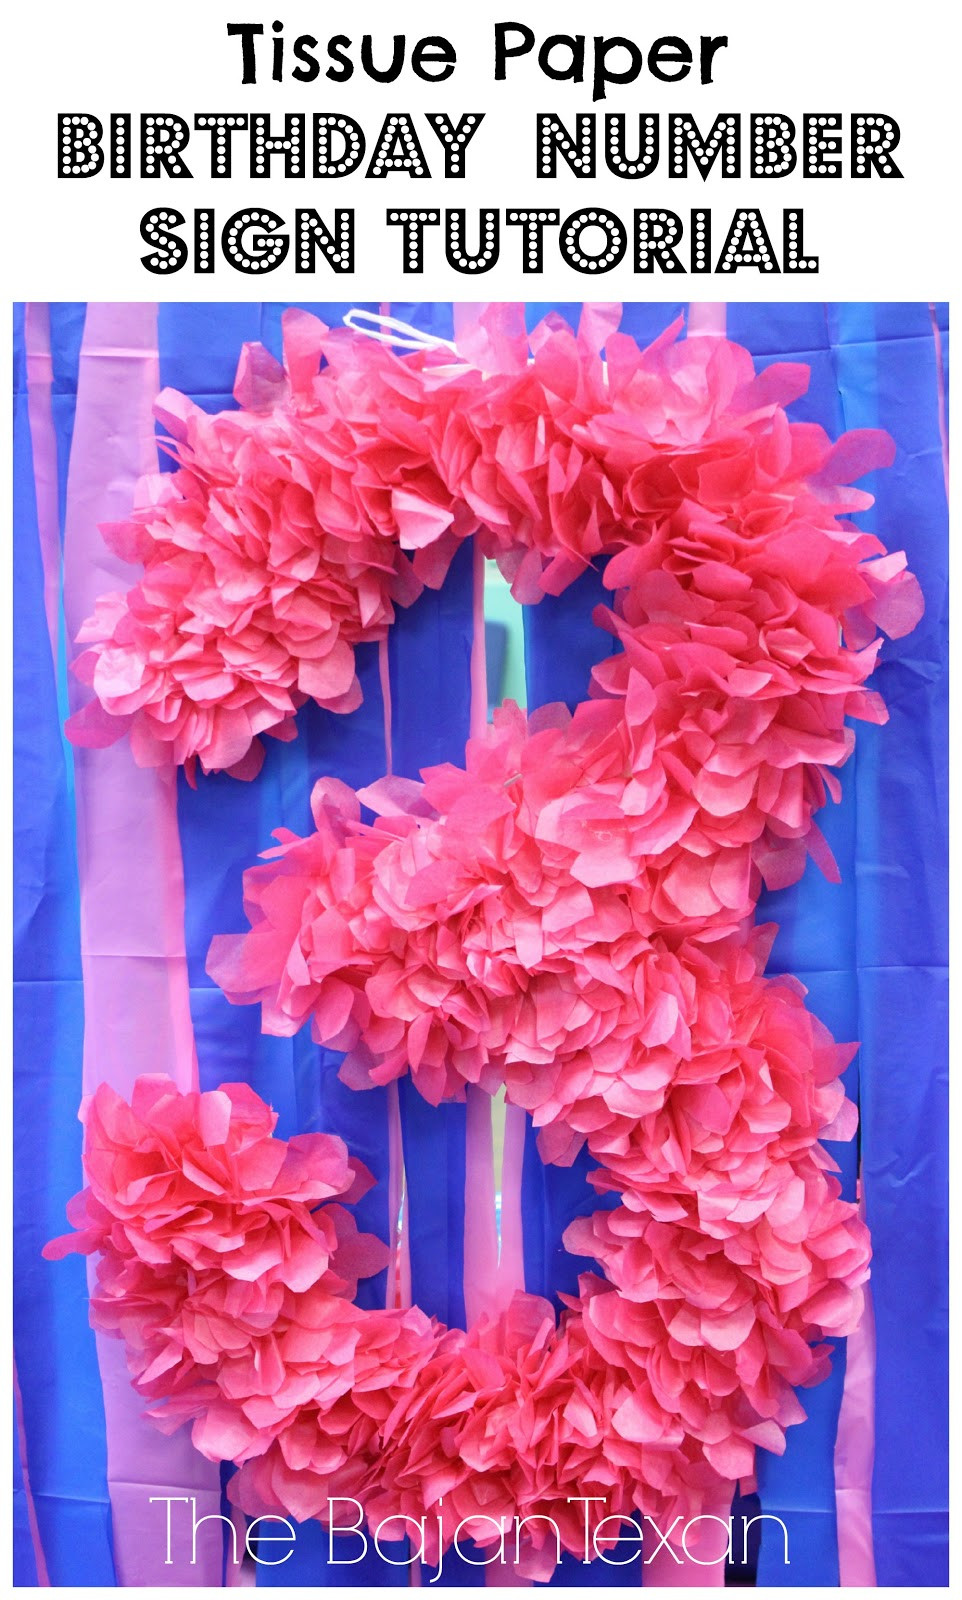 DIY Paper Party Decorations
 DIY Party Decor Tissue Paper Birthday Number Sign